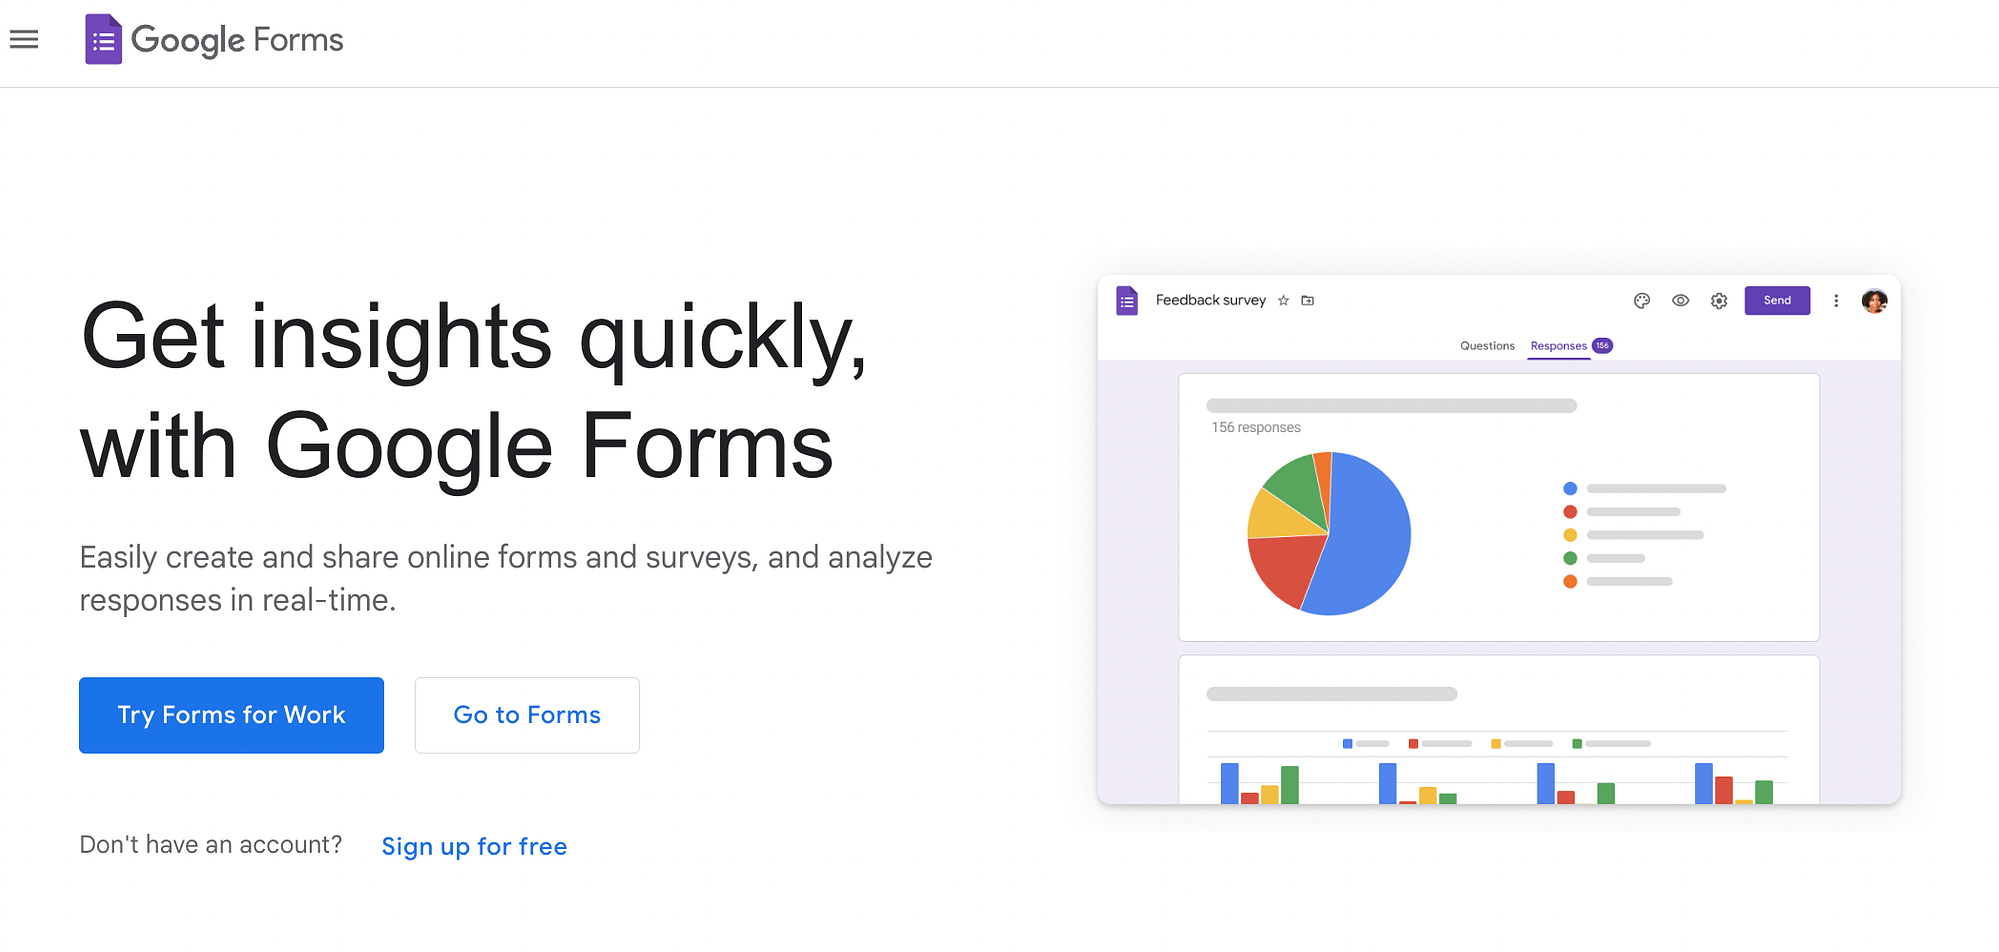 If you're looking for free UX research tools, then Google Forms is an excellent option.